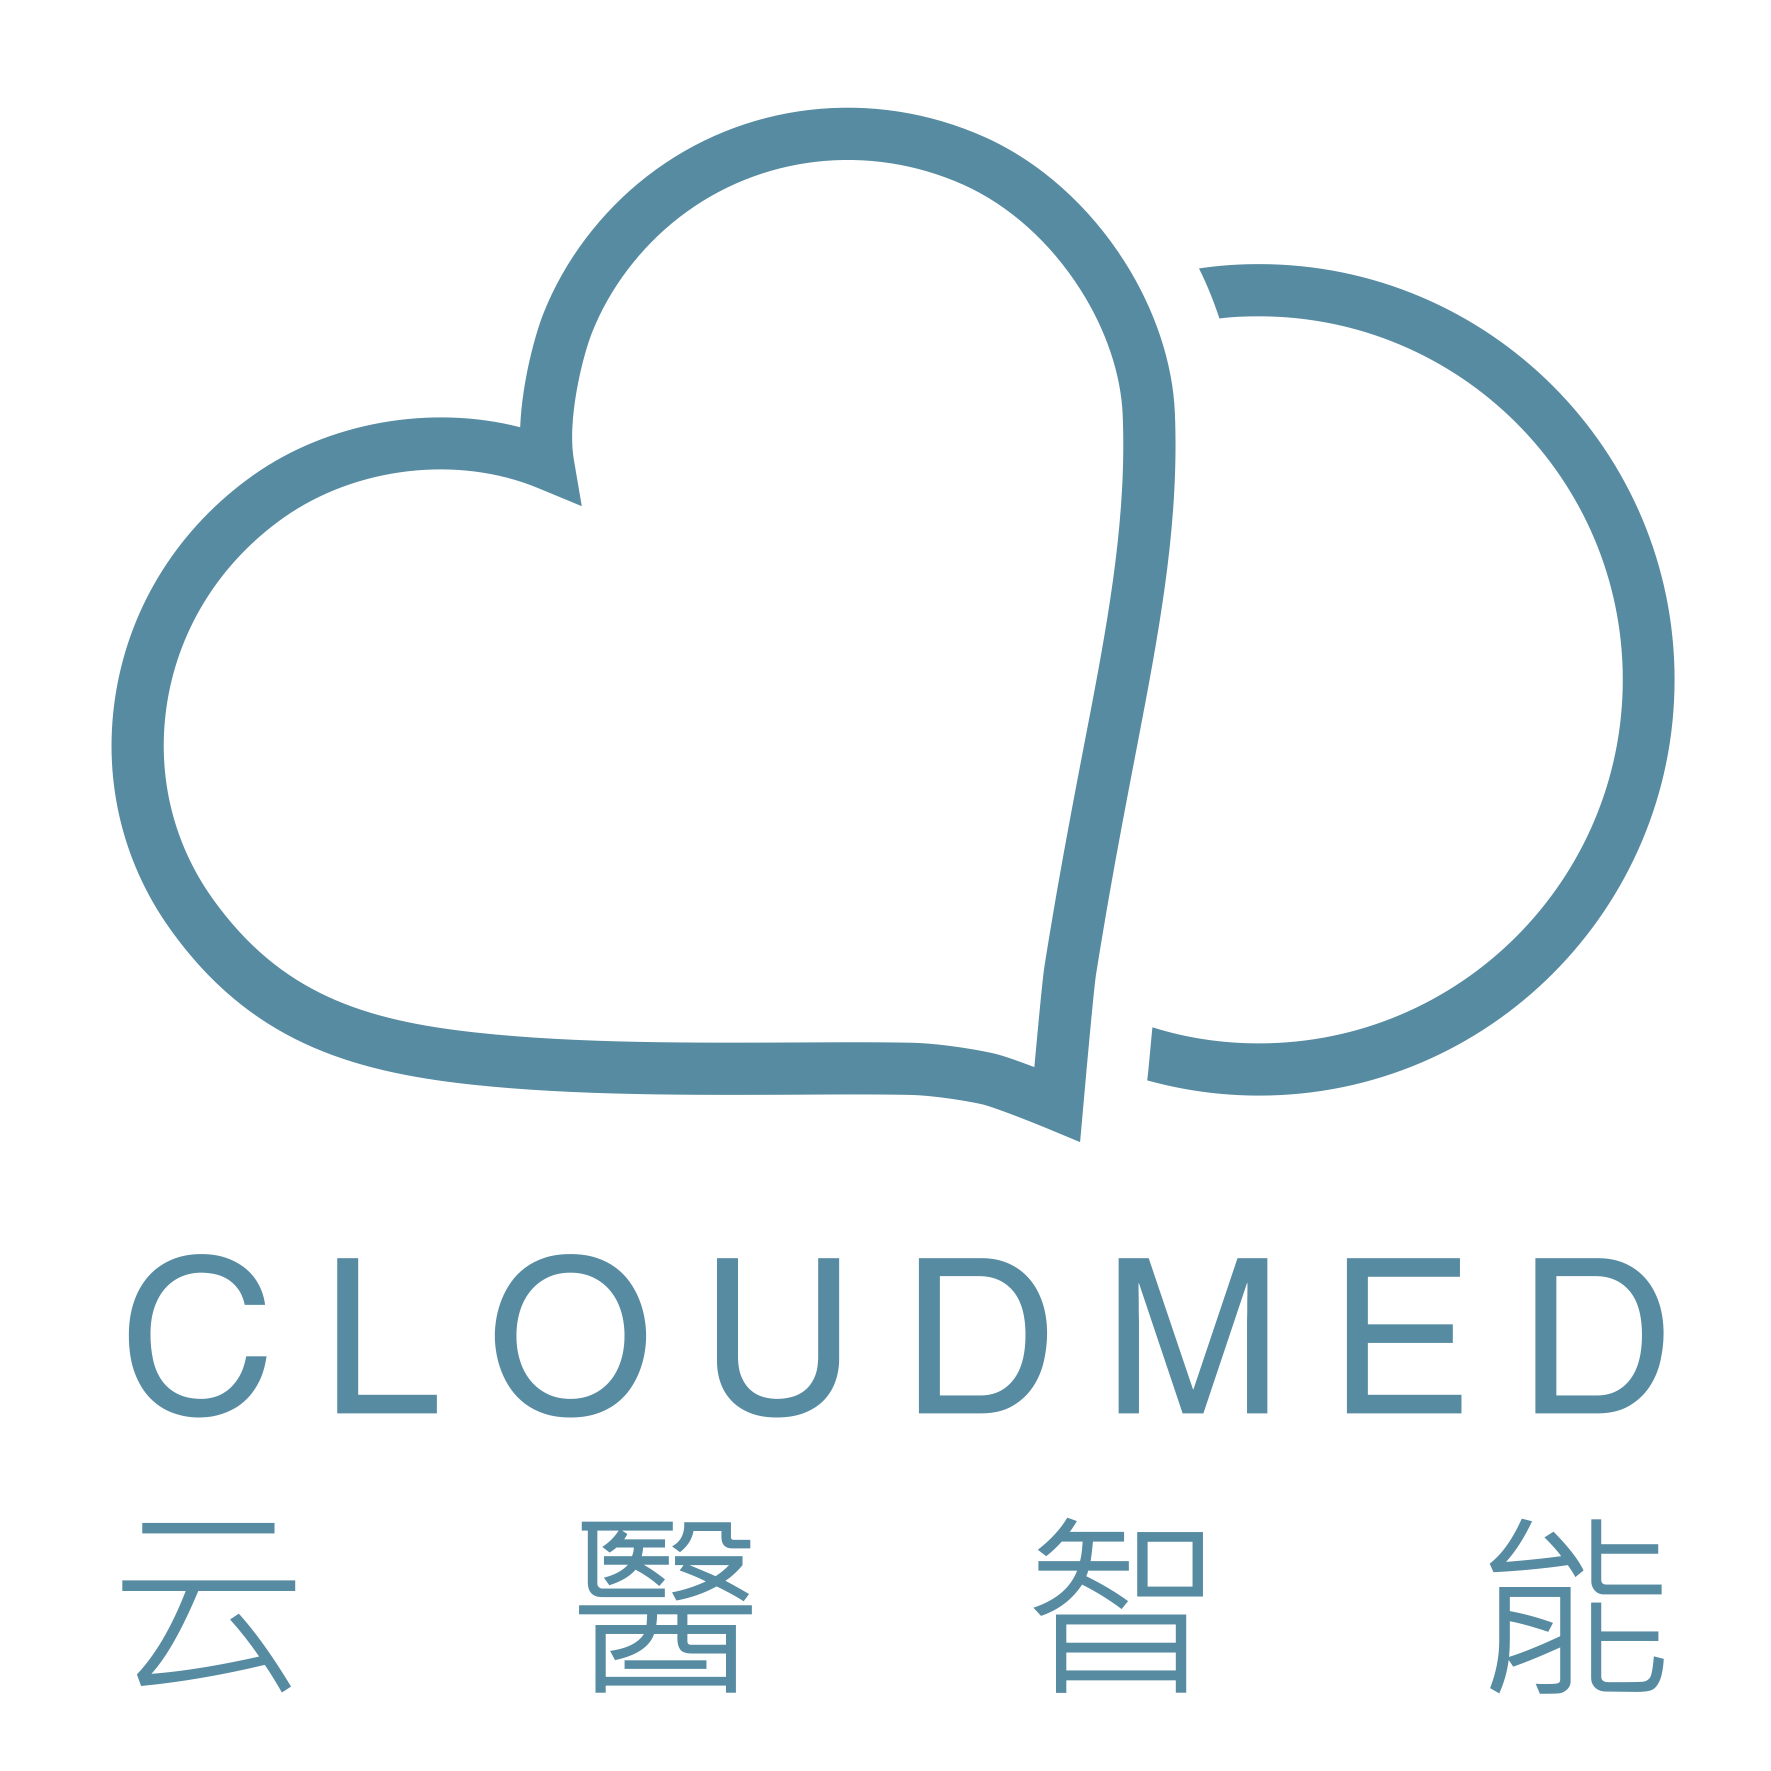 CLOUDMED